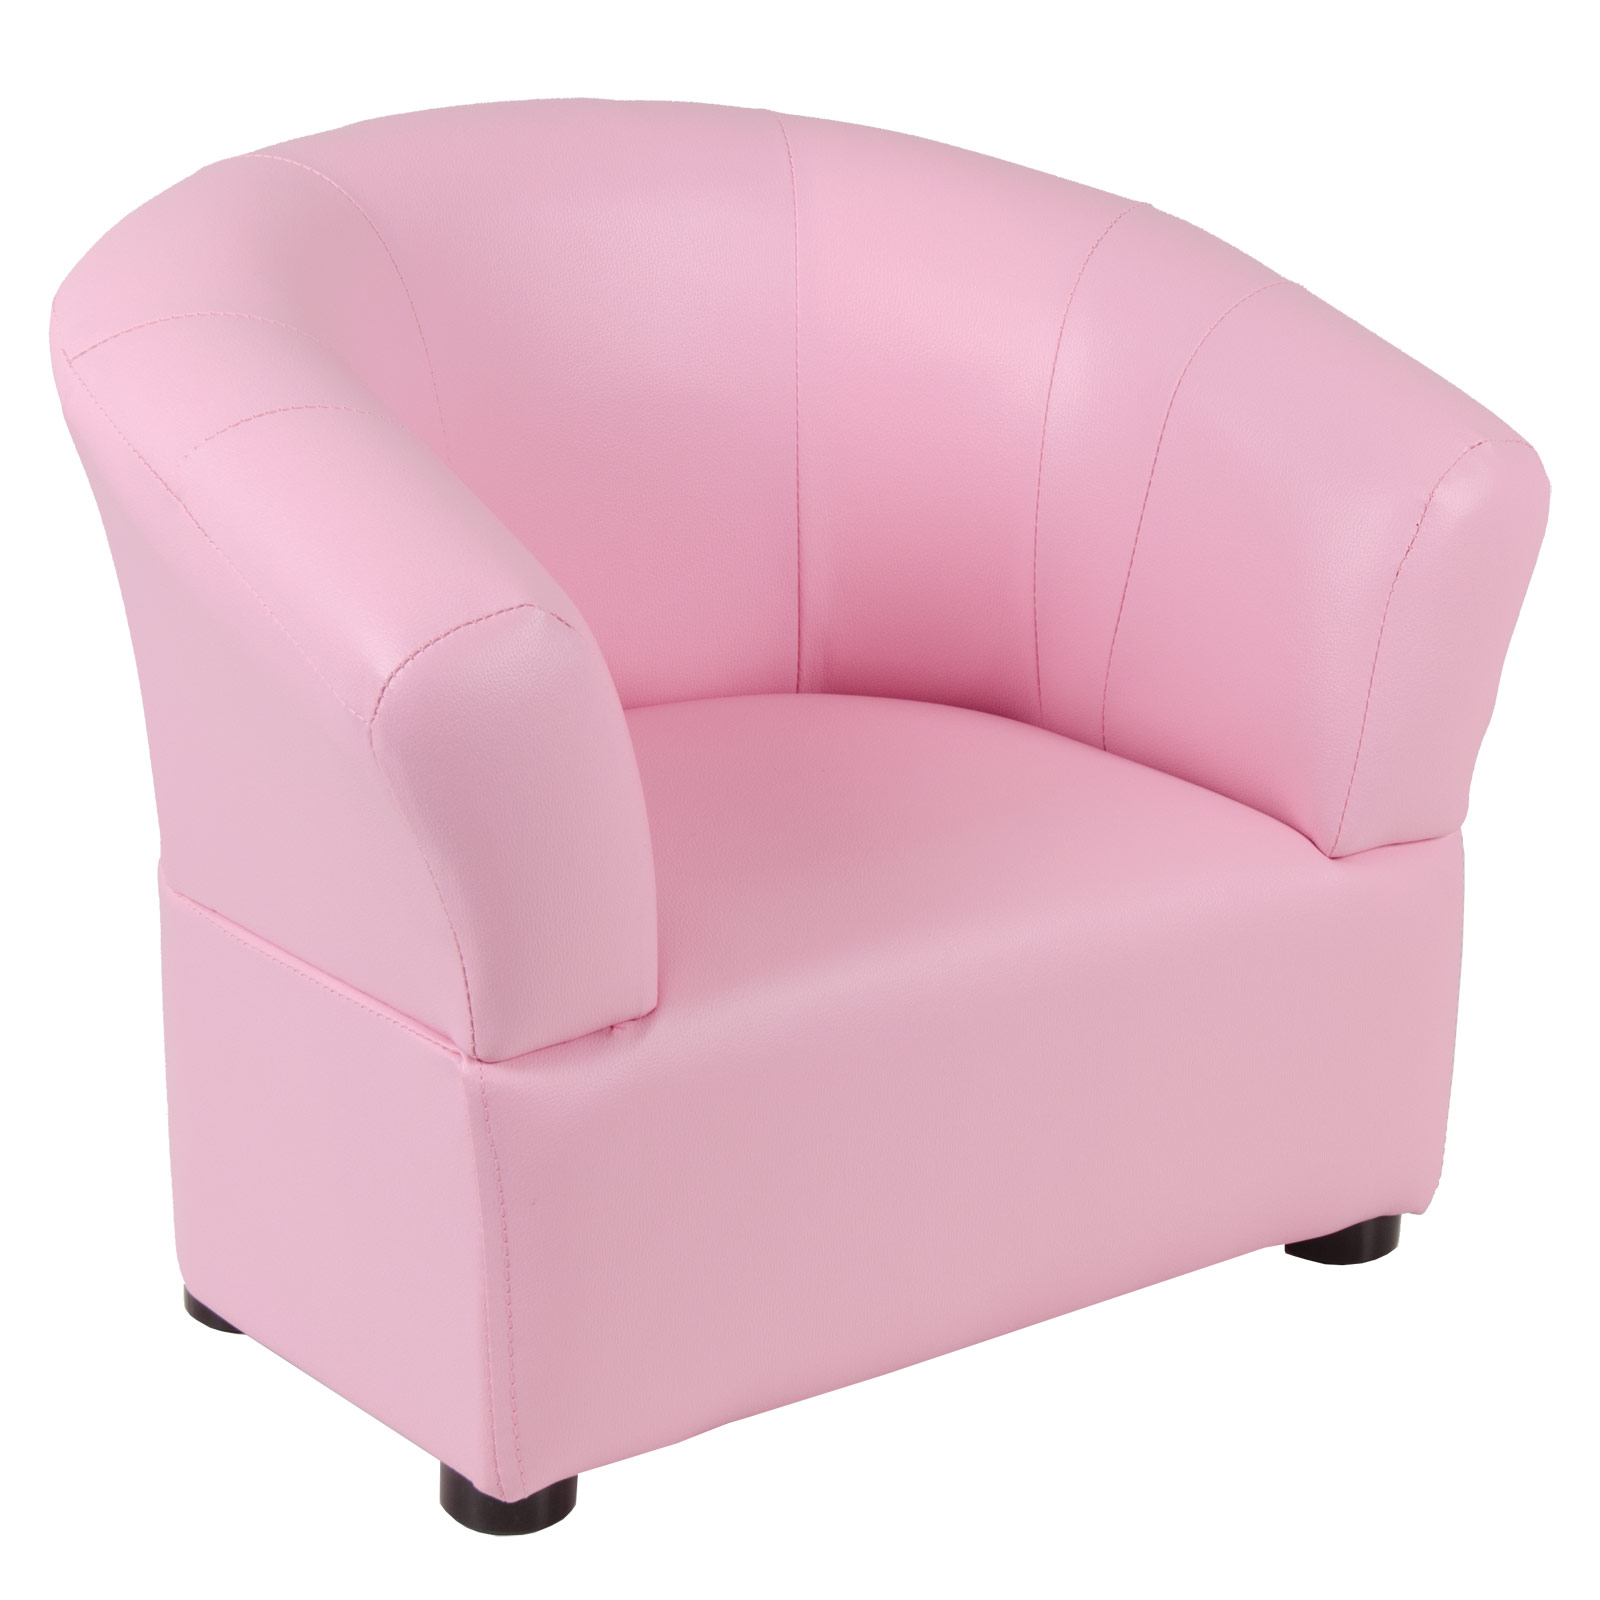 Kids Recliner Chair Children Tub Chairs Early Comfy Pvc Leather Look  Armchair Seat Childrens Home Furniture New Pink And Footstool View Larger  Lazy Boy